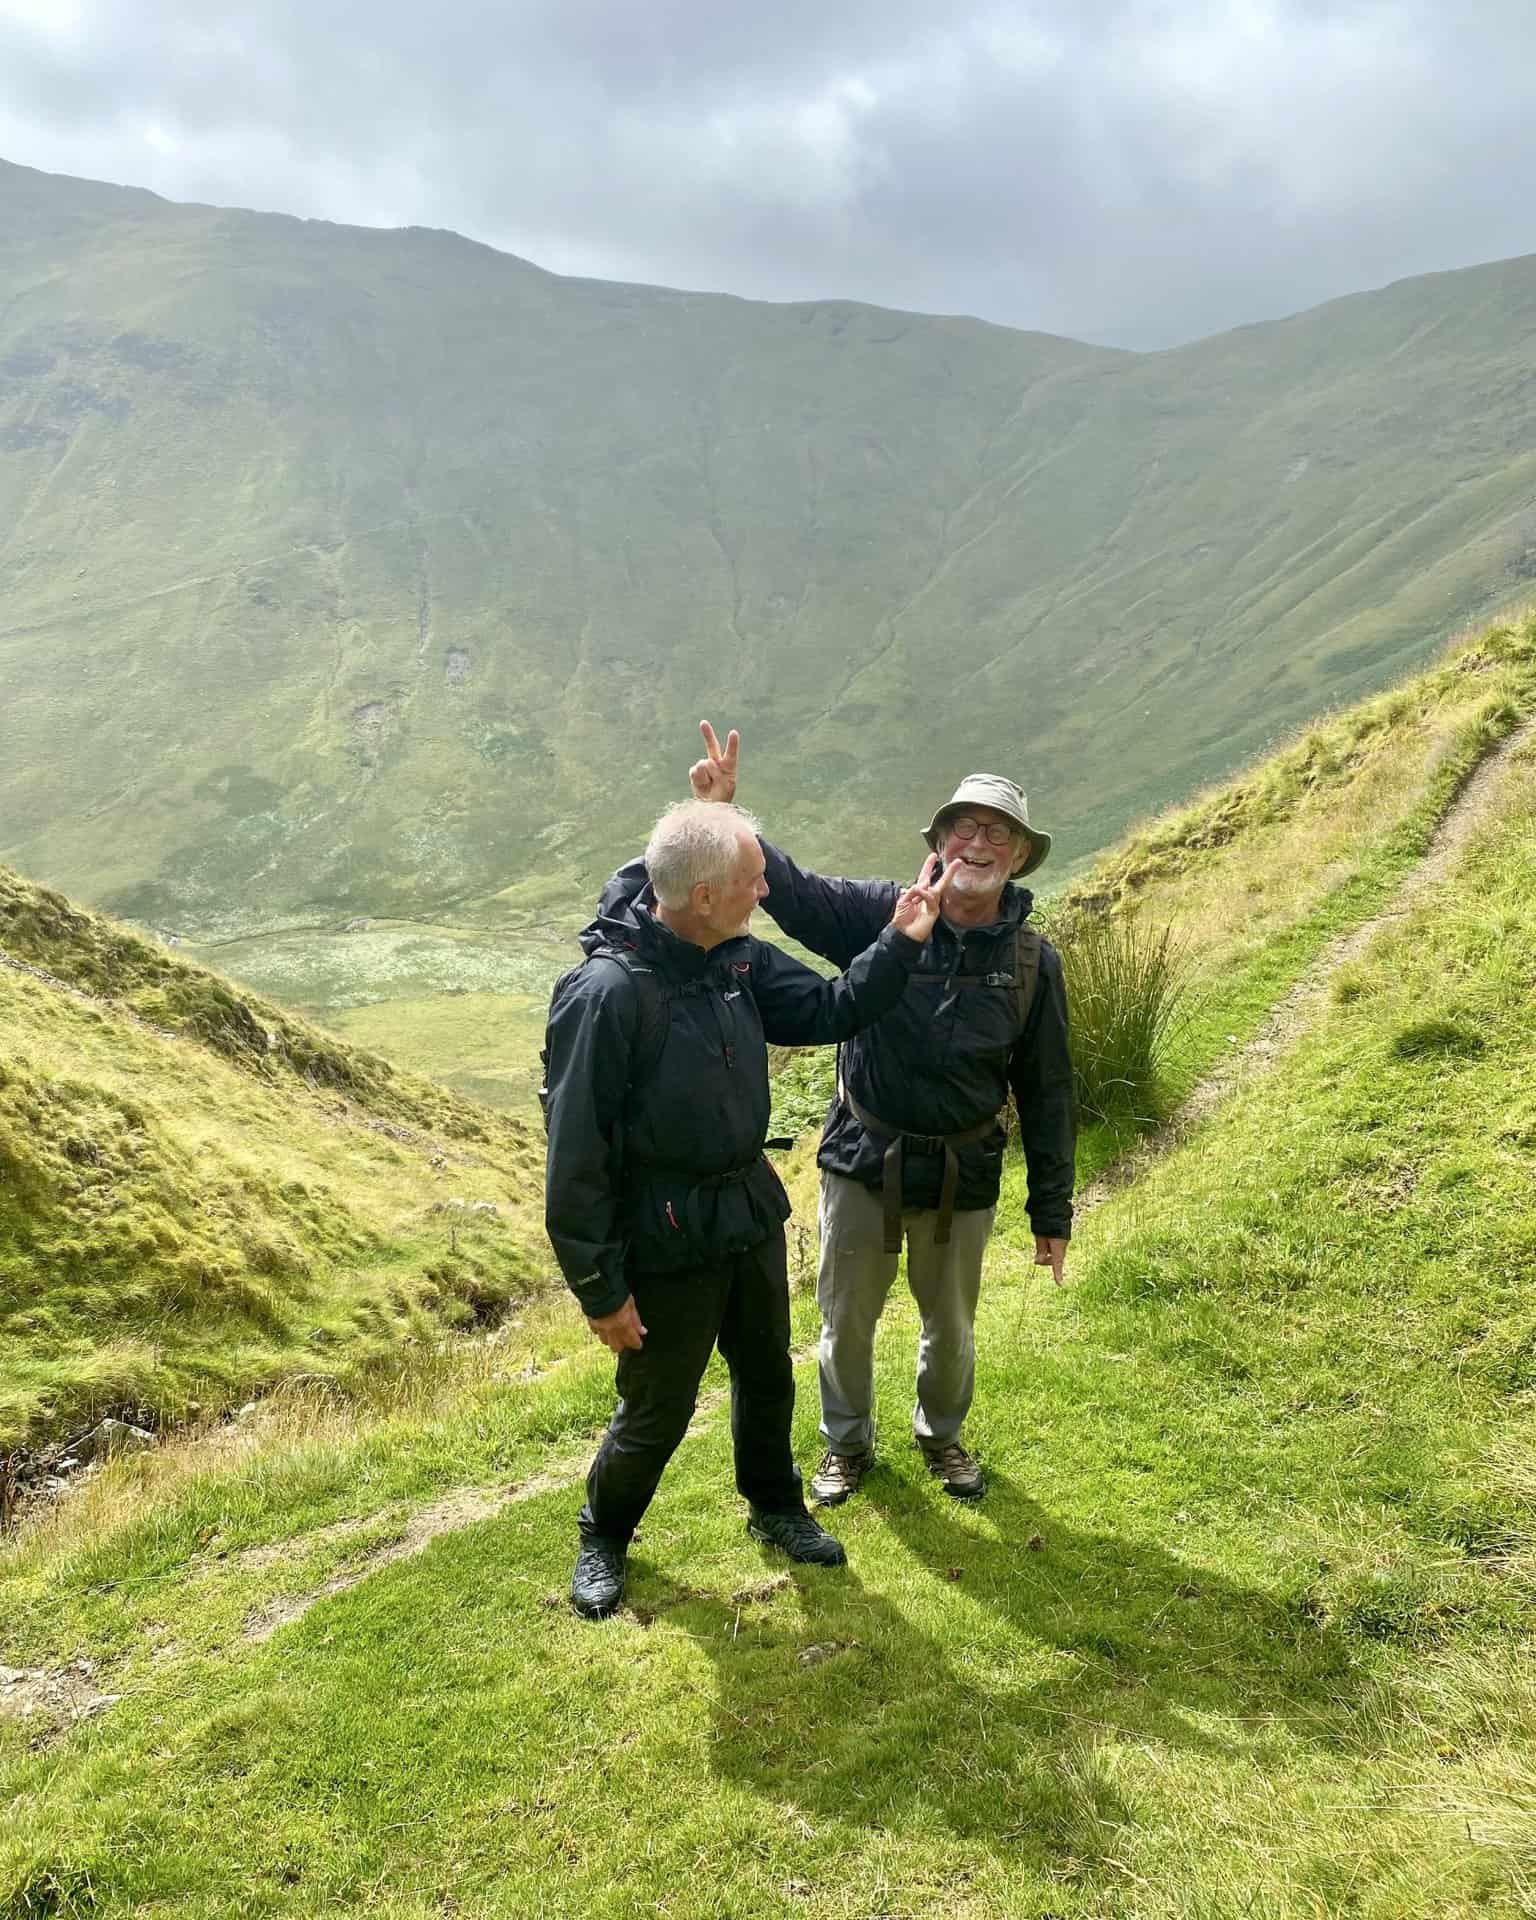 Mike and Keith fooling around against the backdrop of Glencoyne Head.